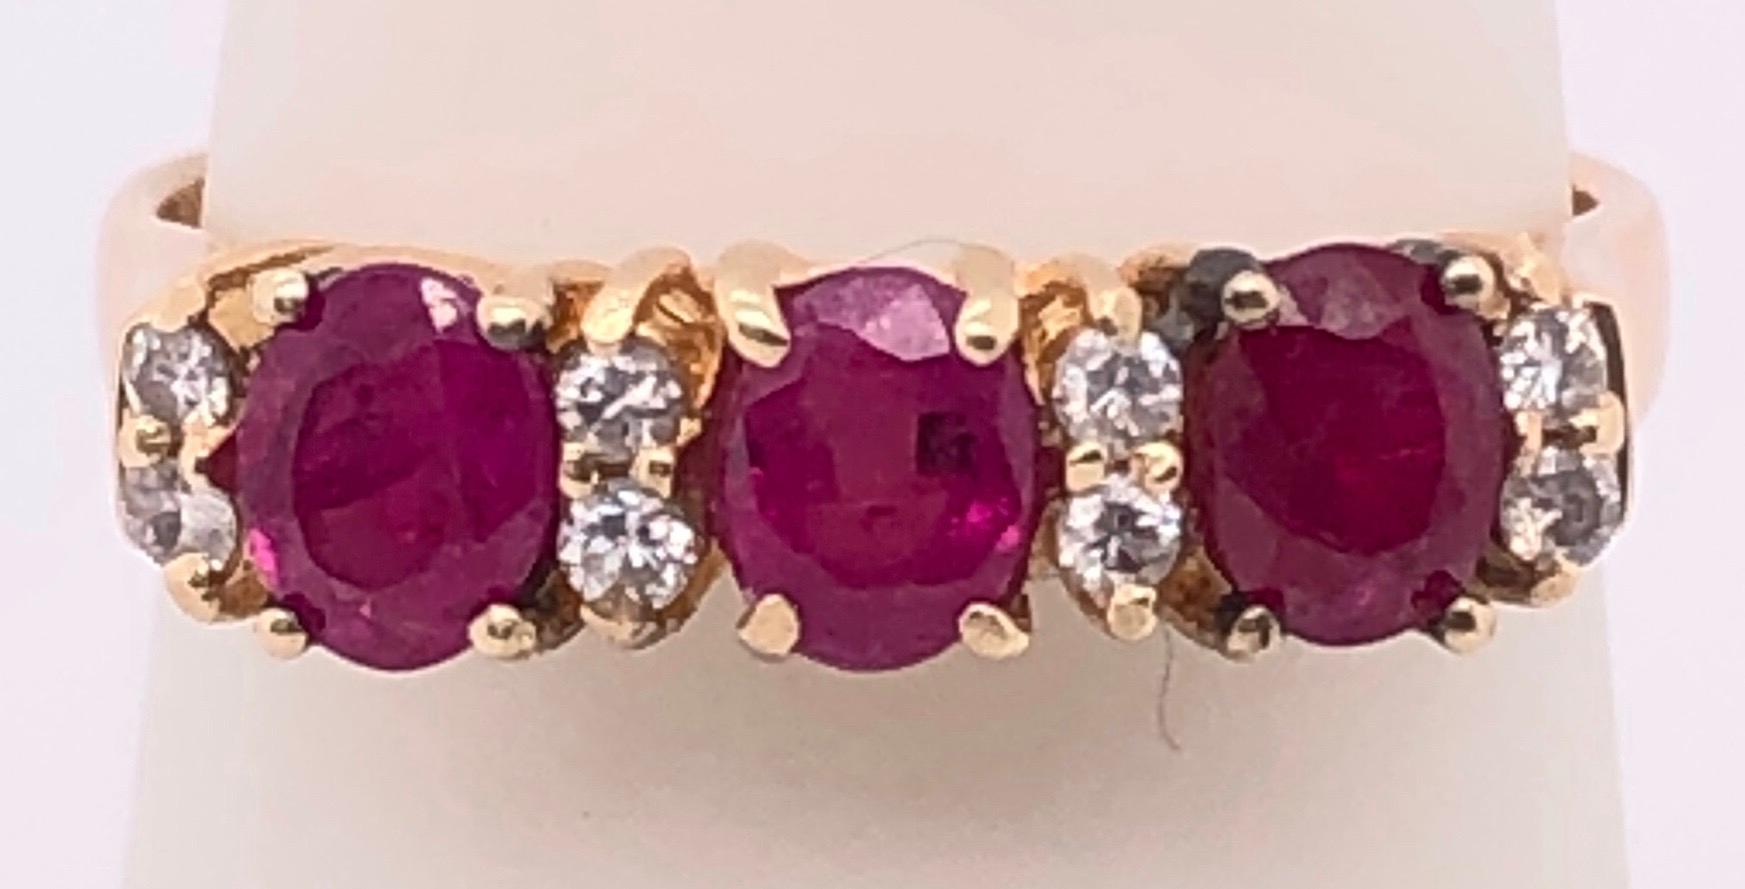 14 Karat Yellow Gold Contemporary Ring with Three Round Ruby's and Diamonds .
Size 7
3 grams total weight.